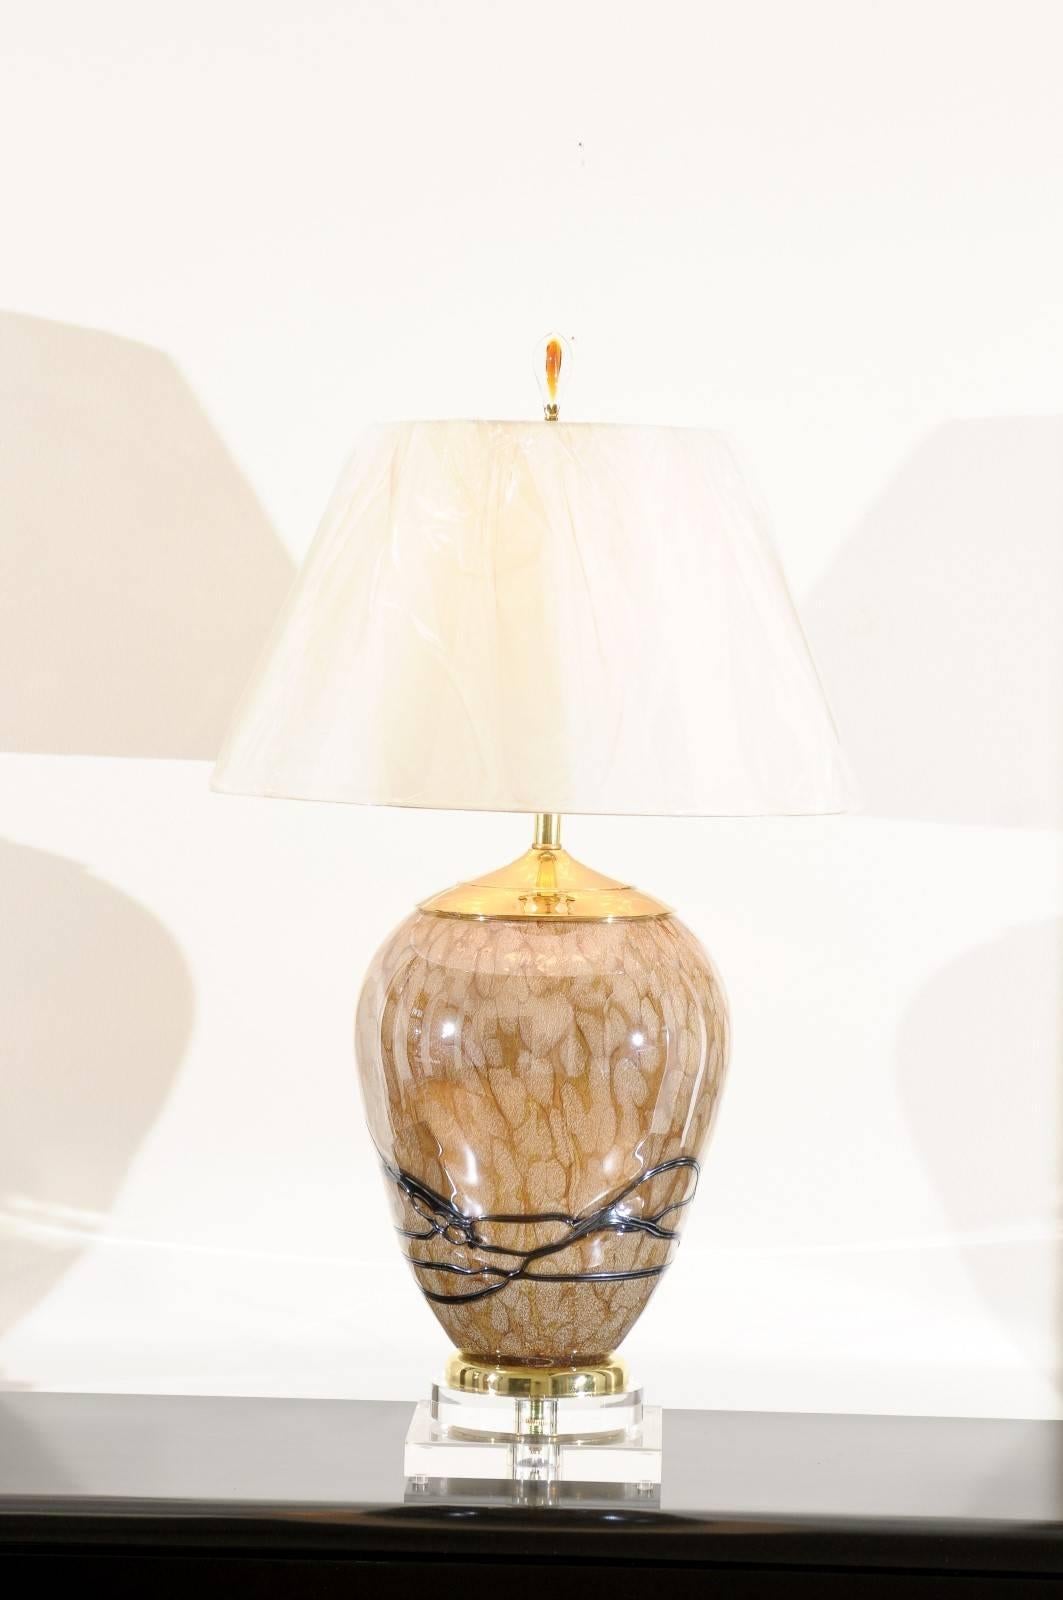 These magnificent lamps are shipped as photographed and described in the narrative. They are custom built using materials of the highest quality and are shipped complete with the new shades, harps and finials shown in the photos.

A stunning pair of